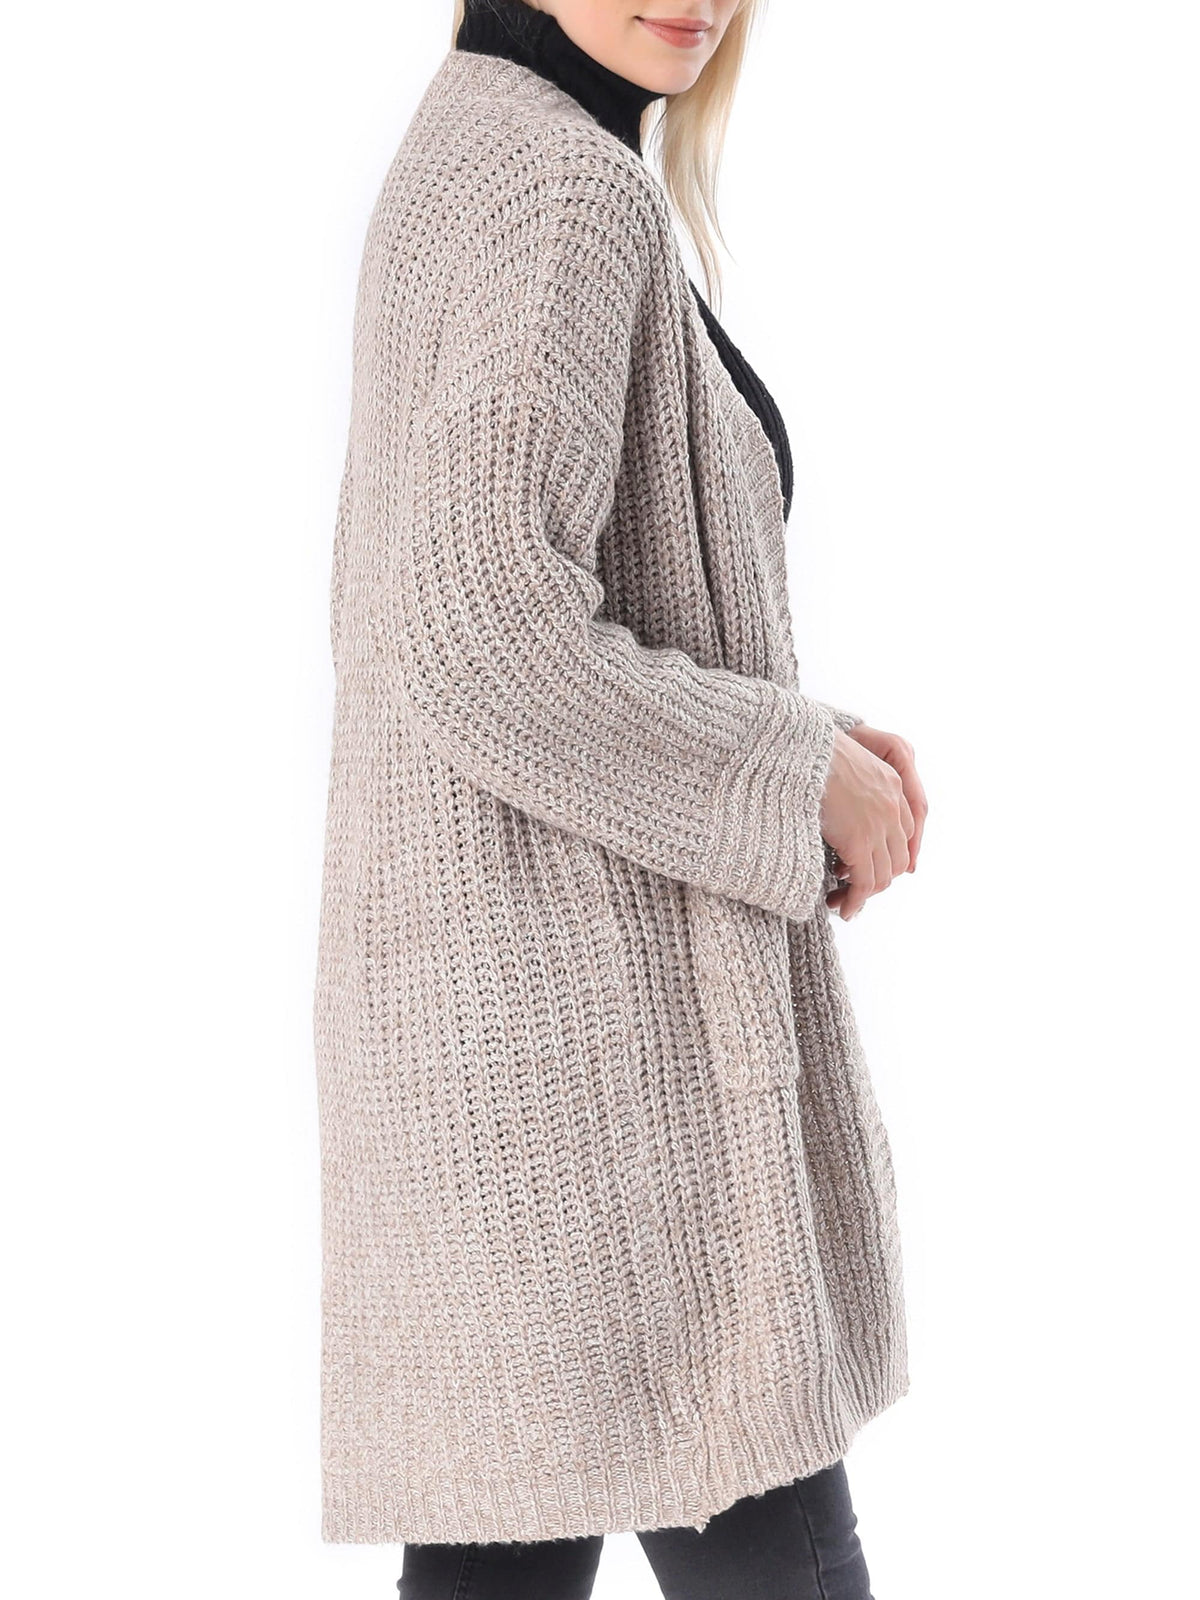 Women's Open Front Knitted Beige Sweater | Sweaters & Cardigans - NORMA REED